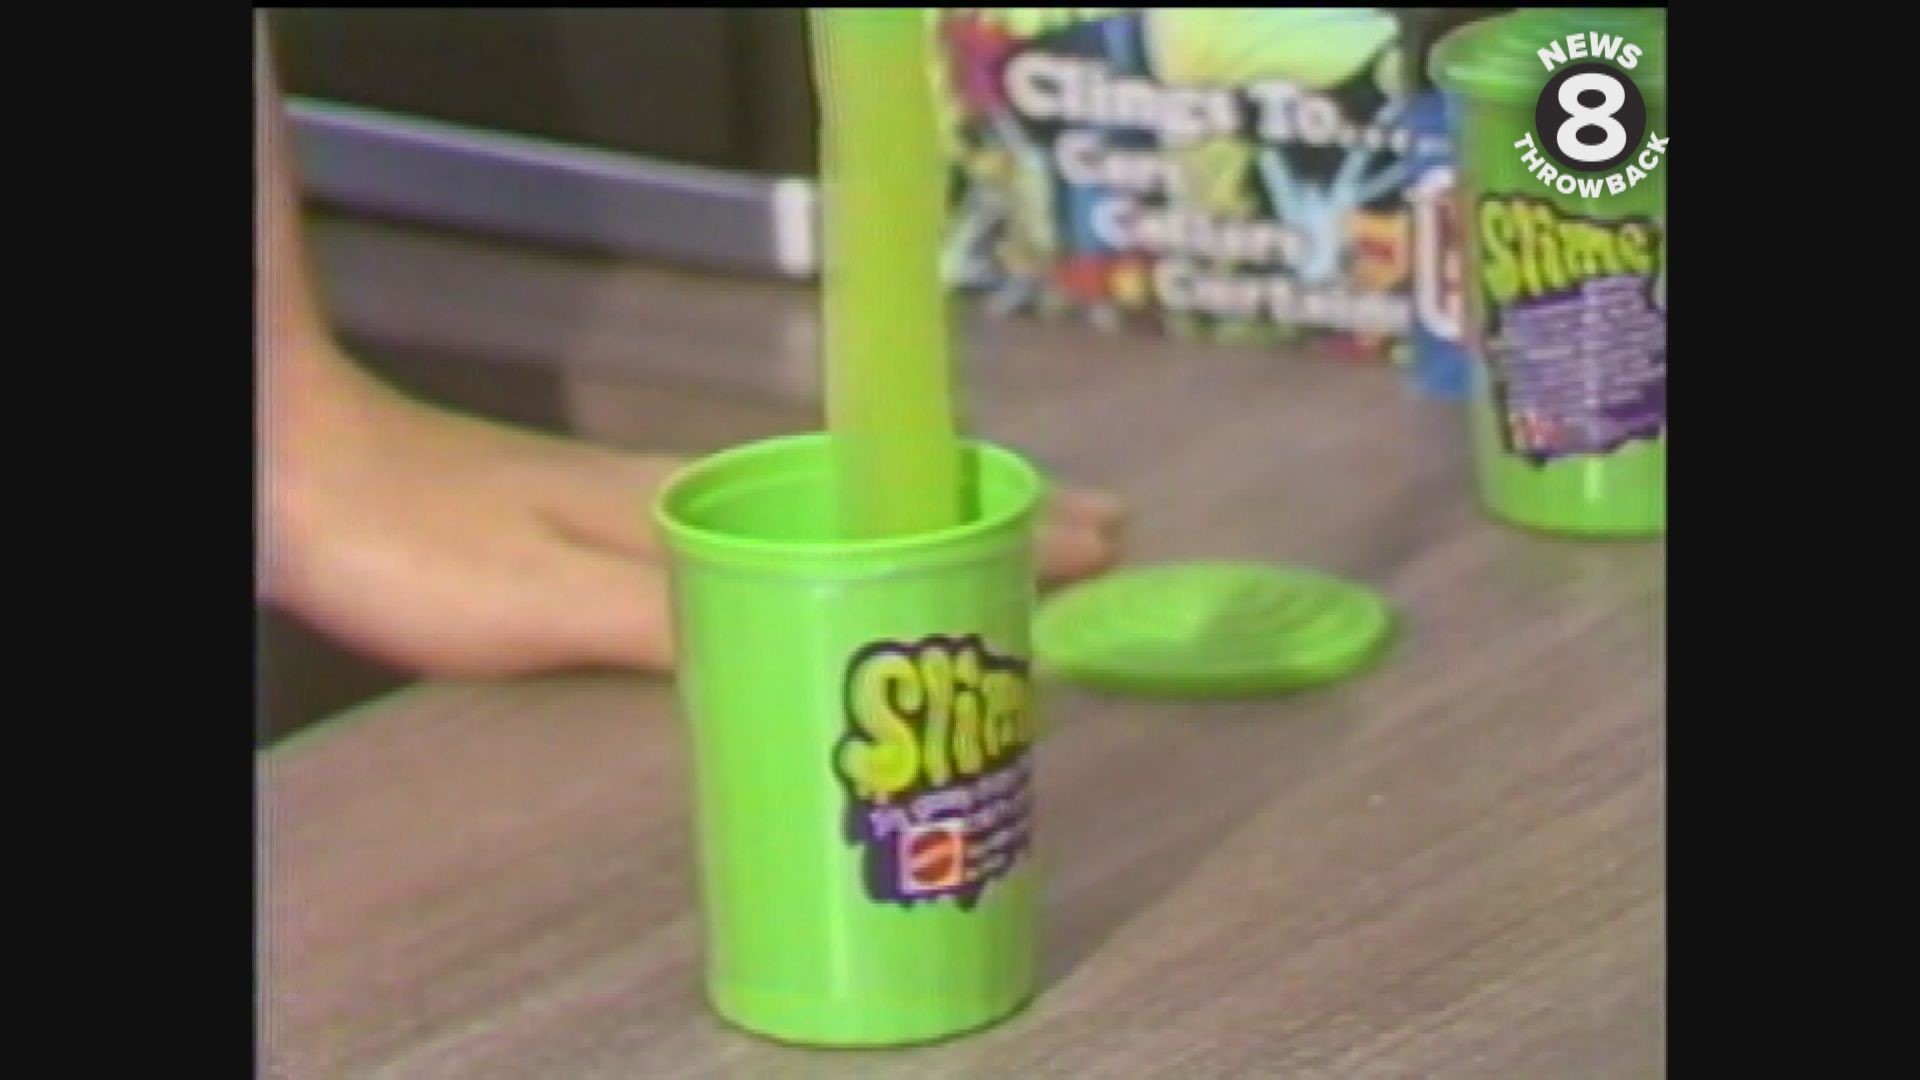 Slime...the gooey green substance in a plastic cup from the 70s | cbs8.com